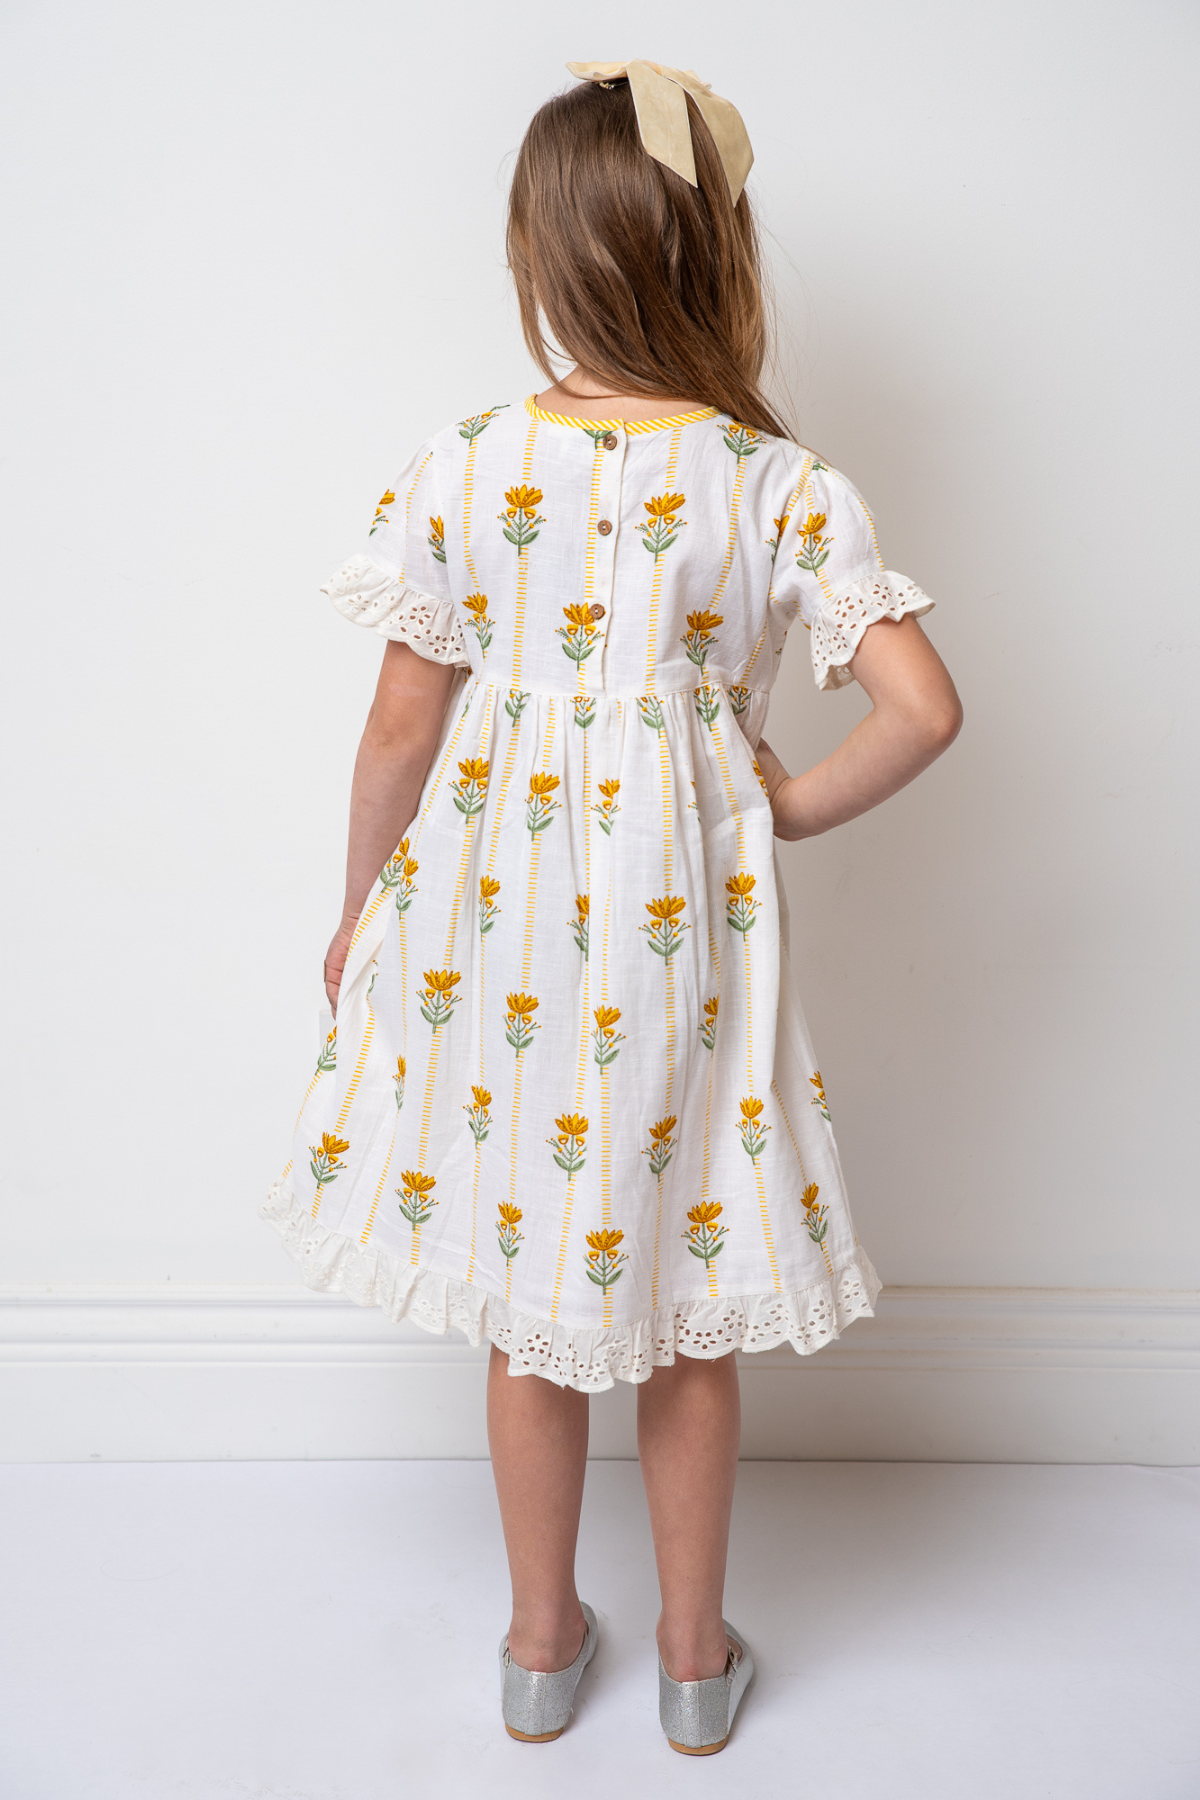 The Lilly Dress in Yellow Floral